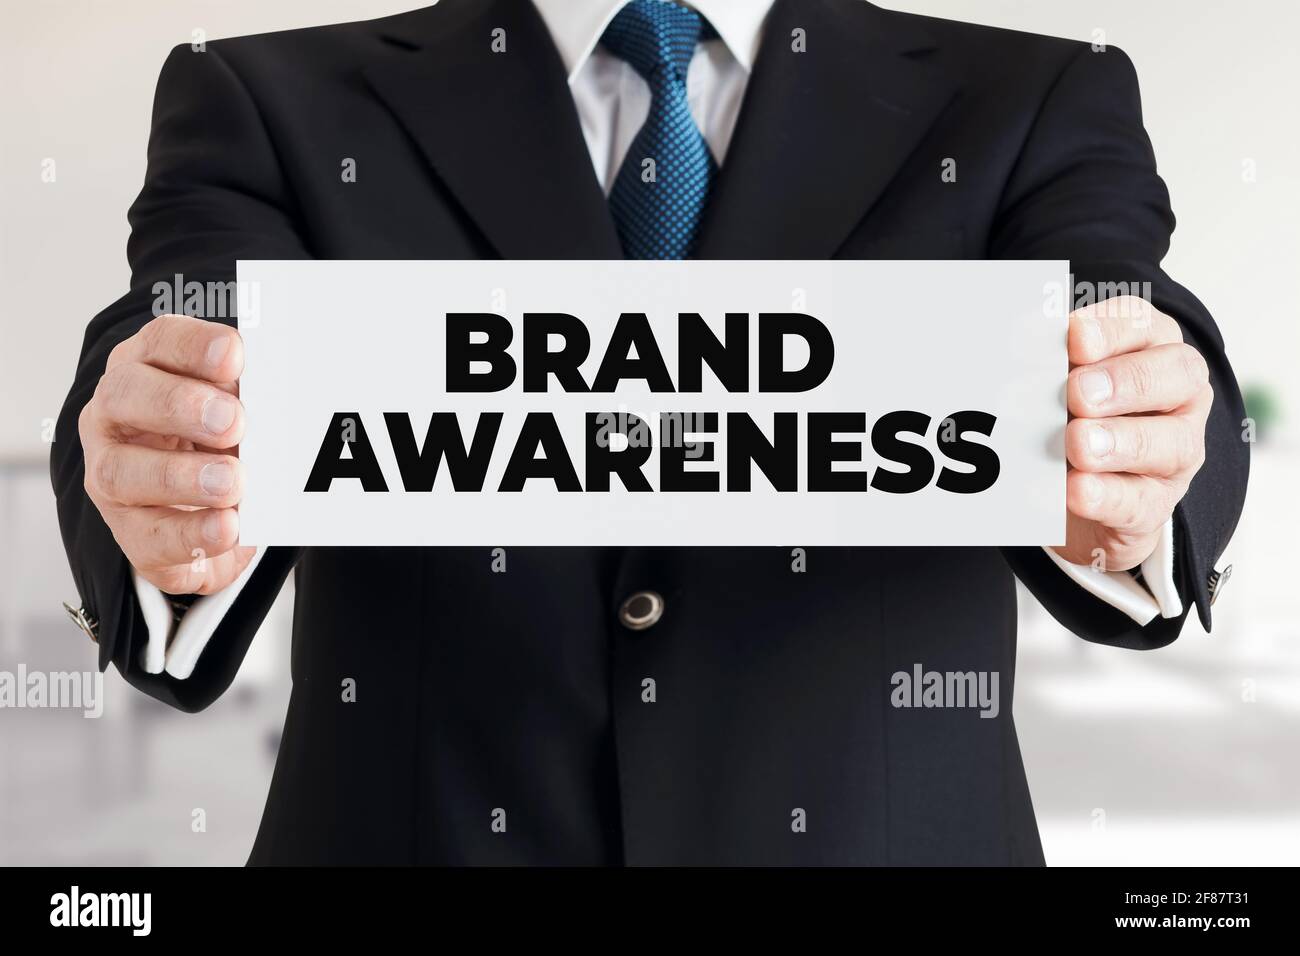 Businessman shows a banner with the message brand awareness. Business marketing strategy branding concept. Stock Photo